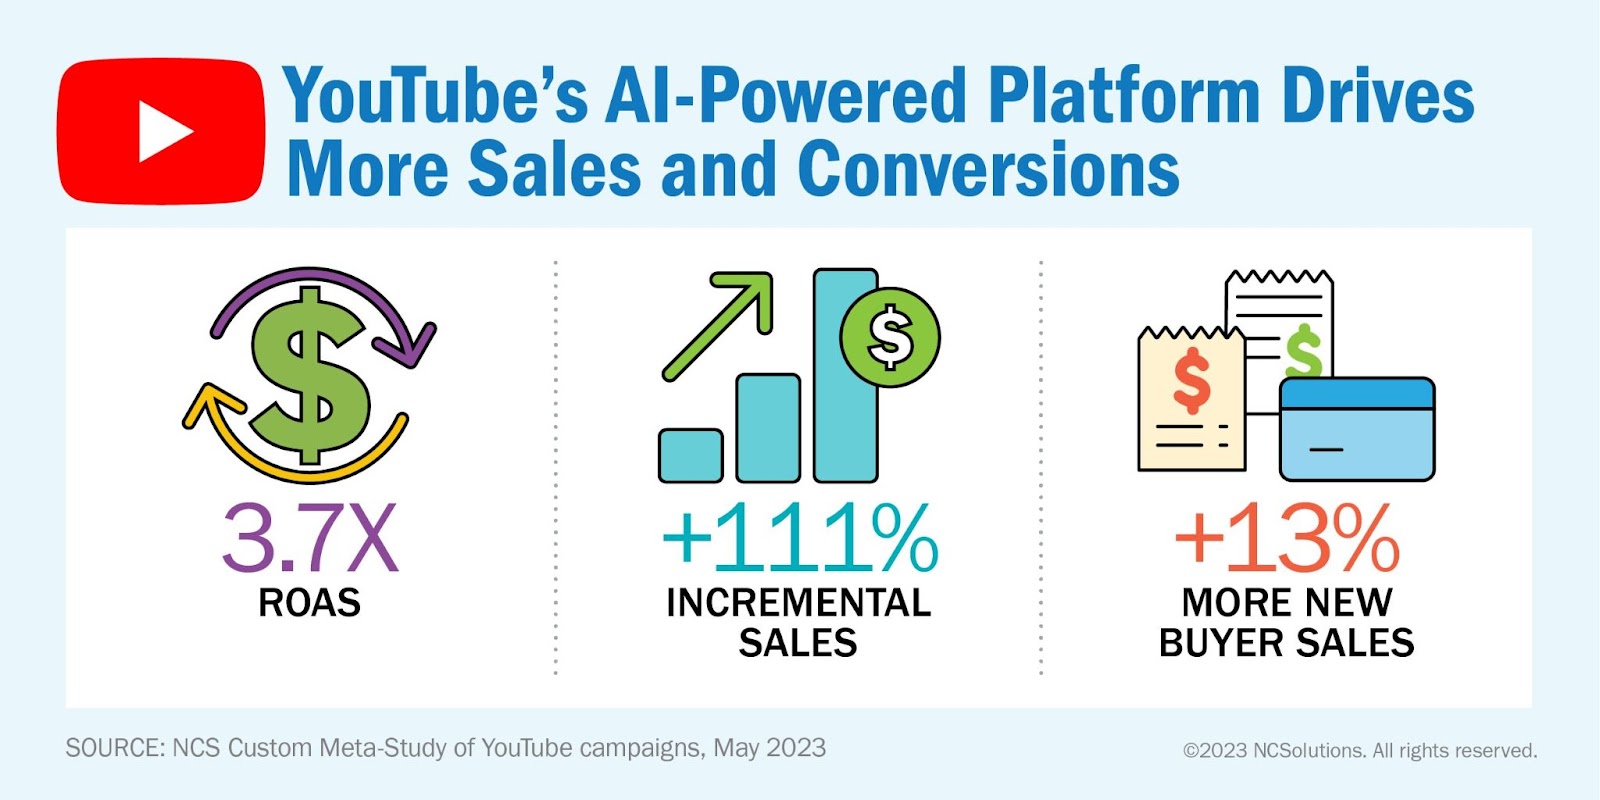 YouTube's AI-powered platform drives more sales and conversions